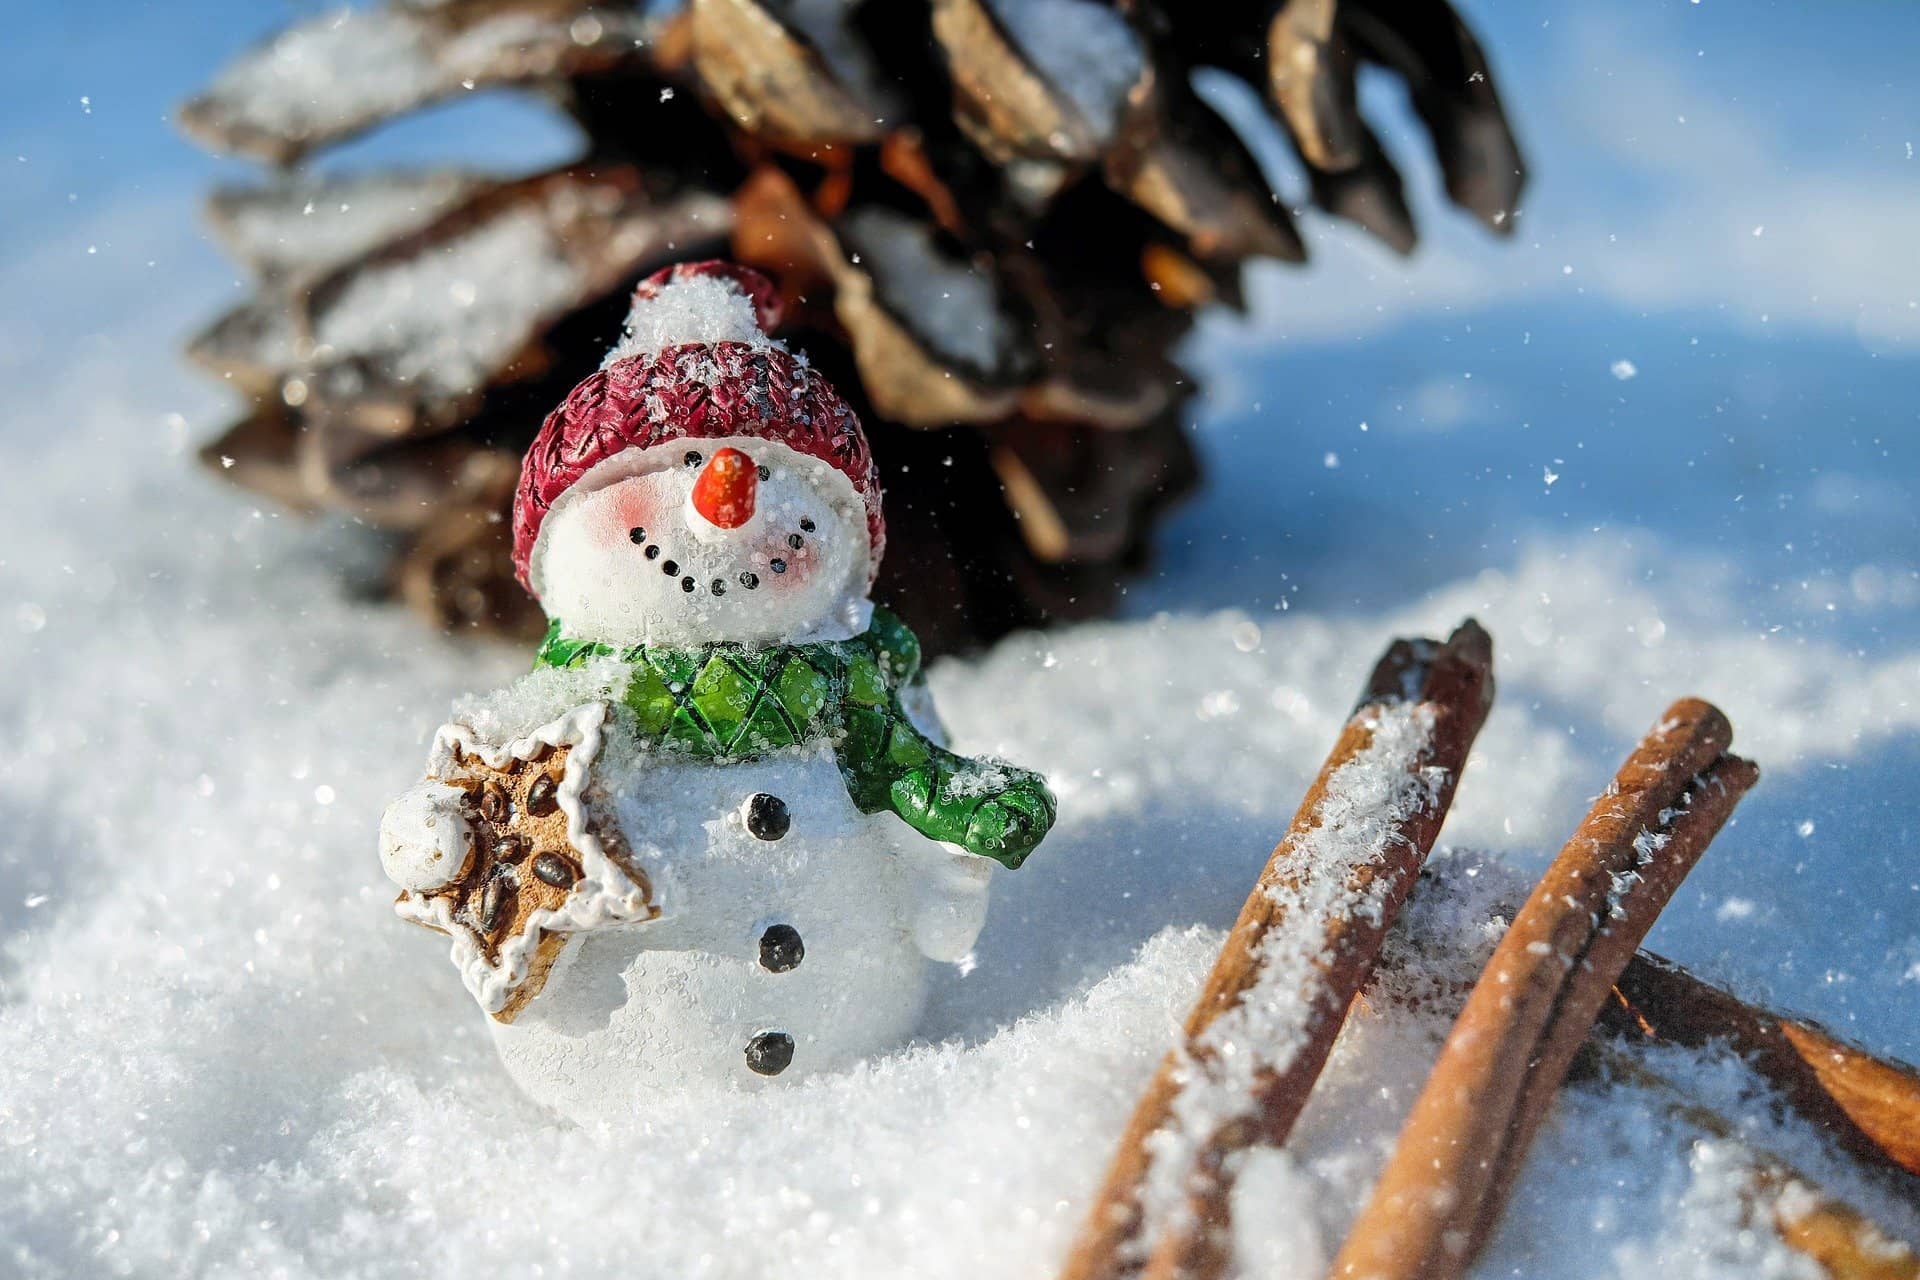 snowman-1882635_1920-winter-cold-snow-image-by-couleur-from-pixabay-jpg-3